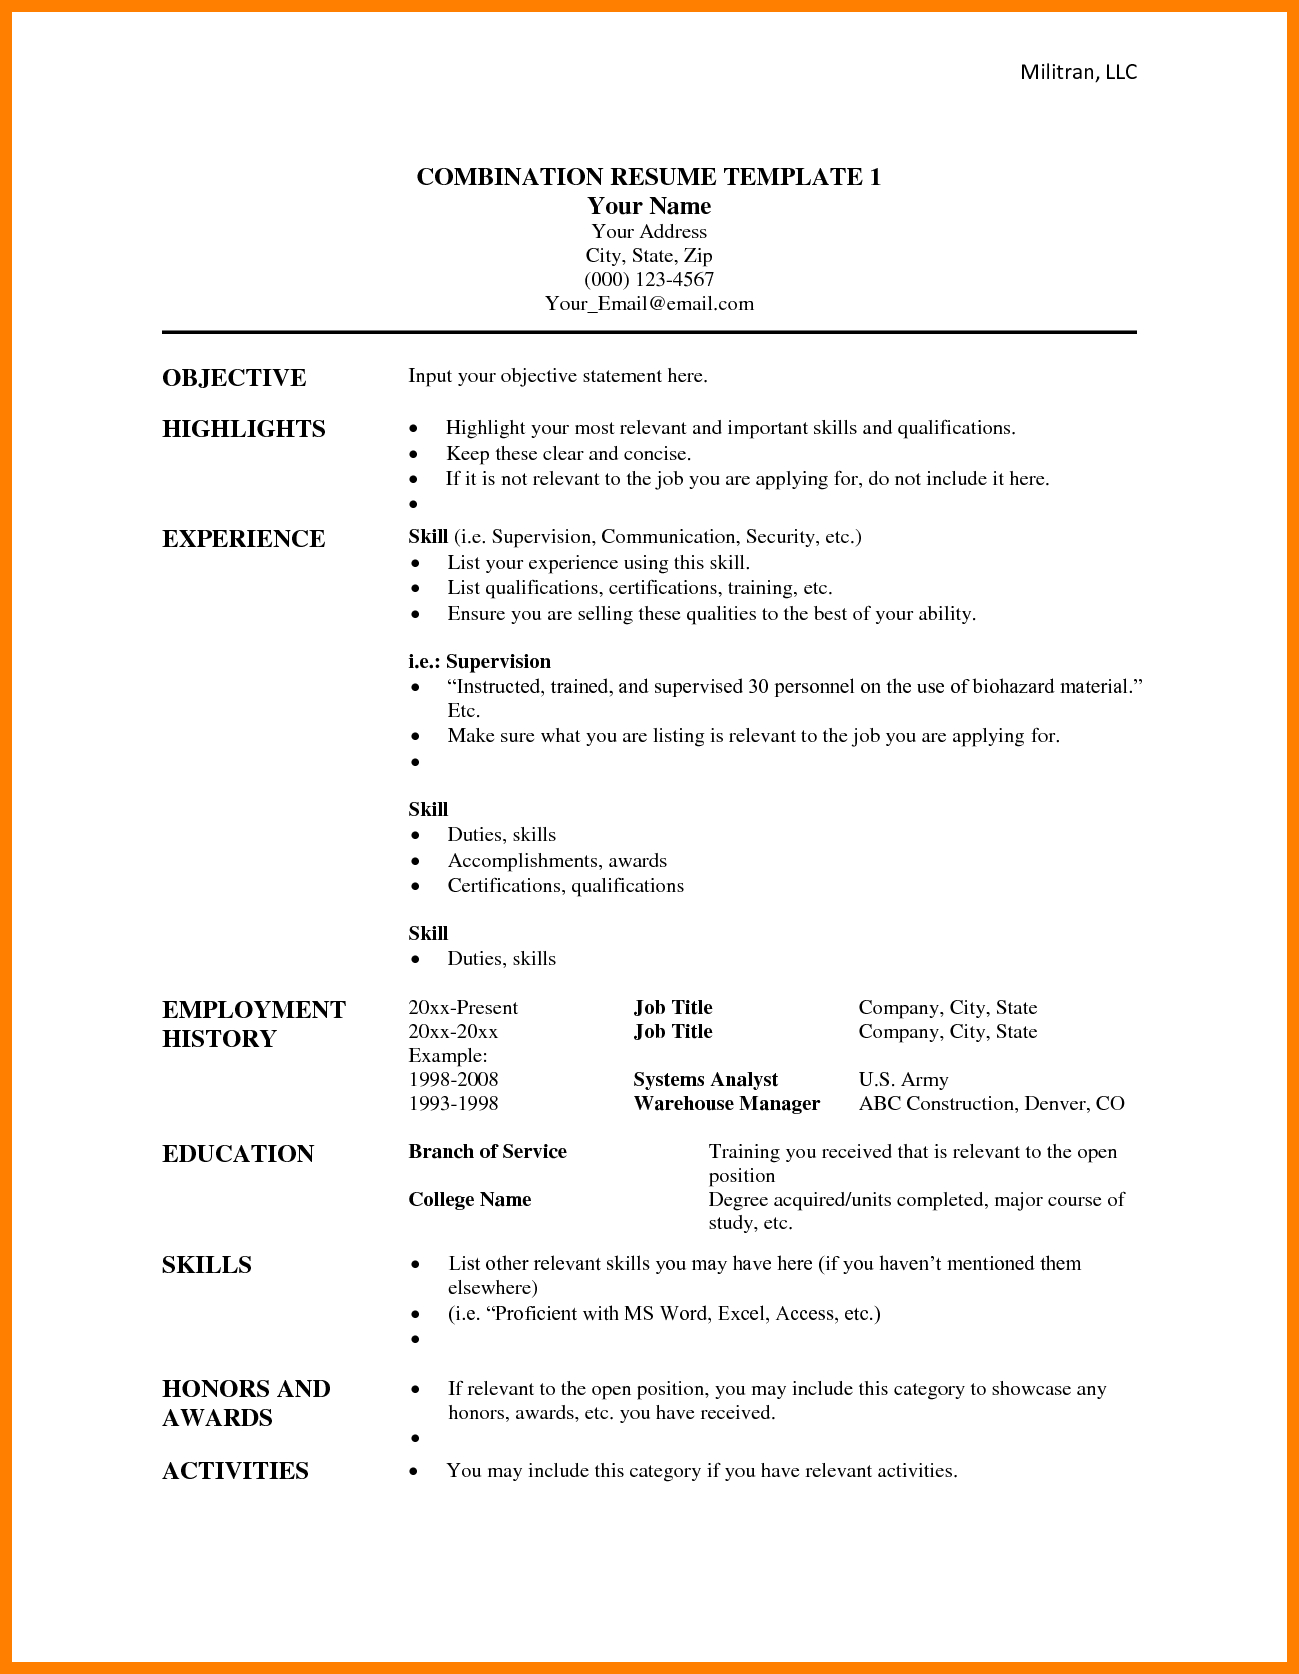 8+ Functional Resume Template Microsoft Word | Reptile Shop Inside Combination Resume Template Word